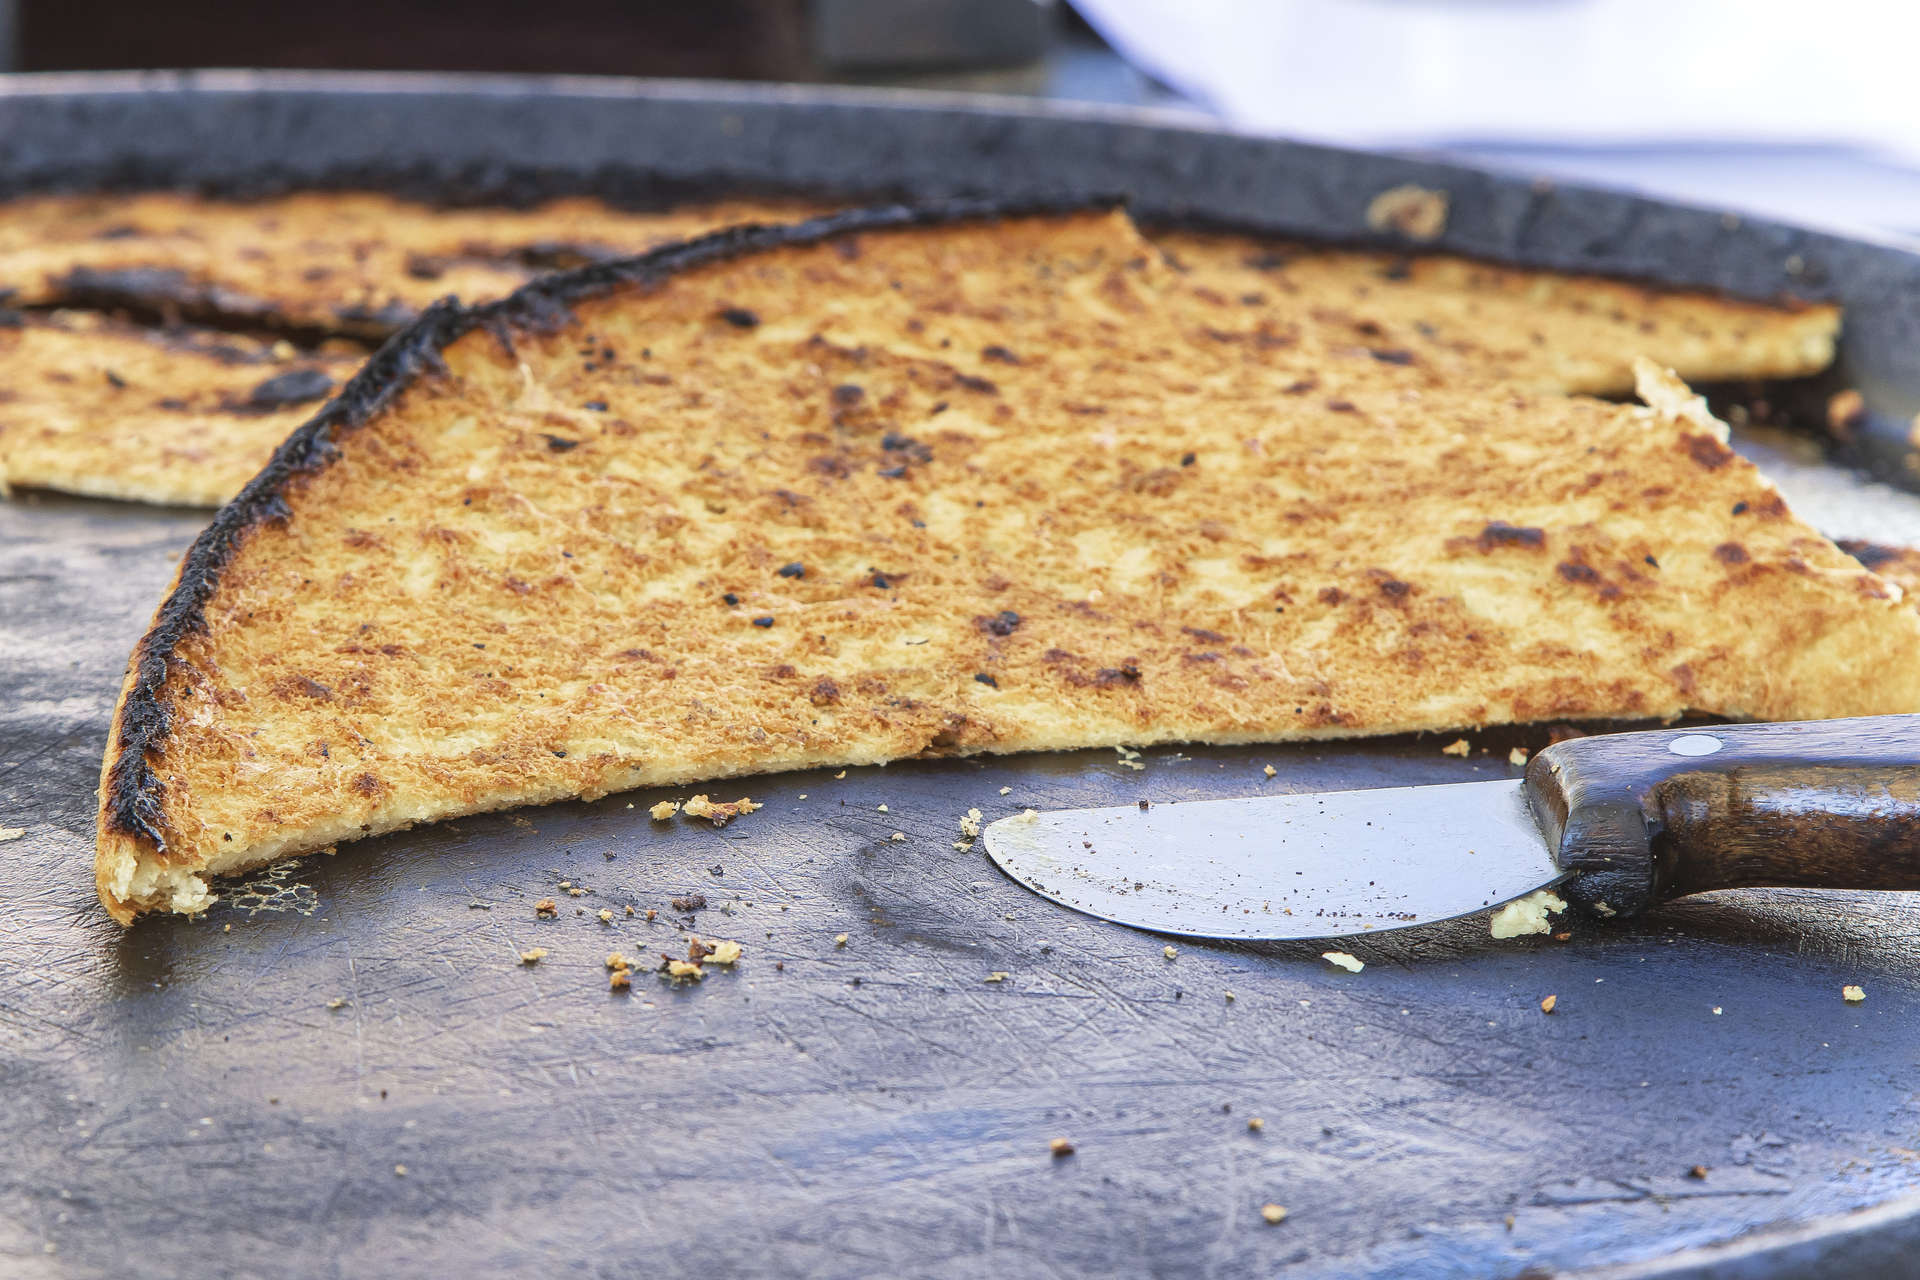 Socca is a moreish and crispy chickpea-flour pancake